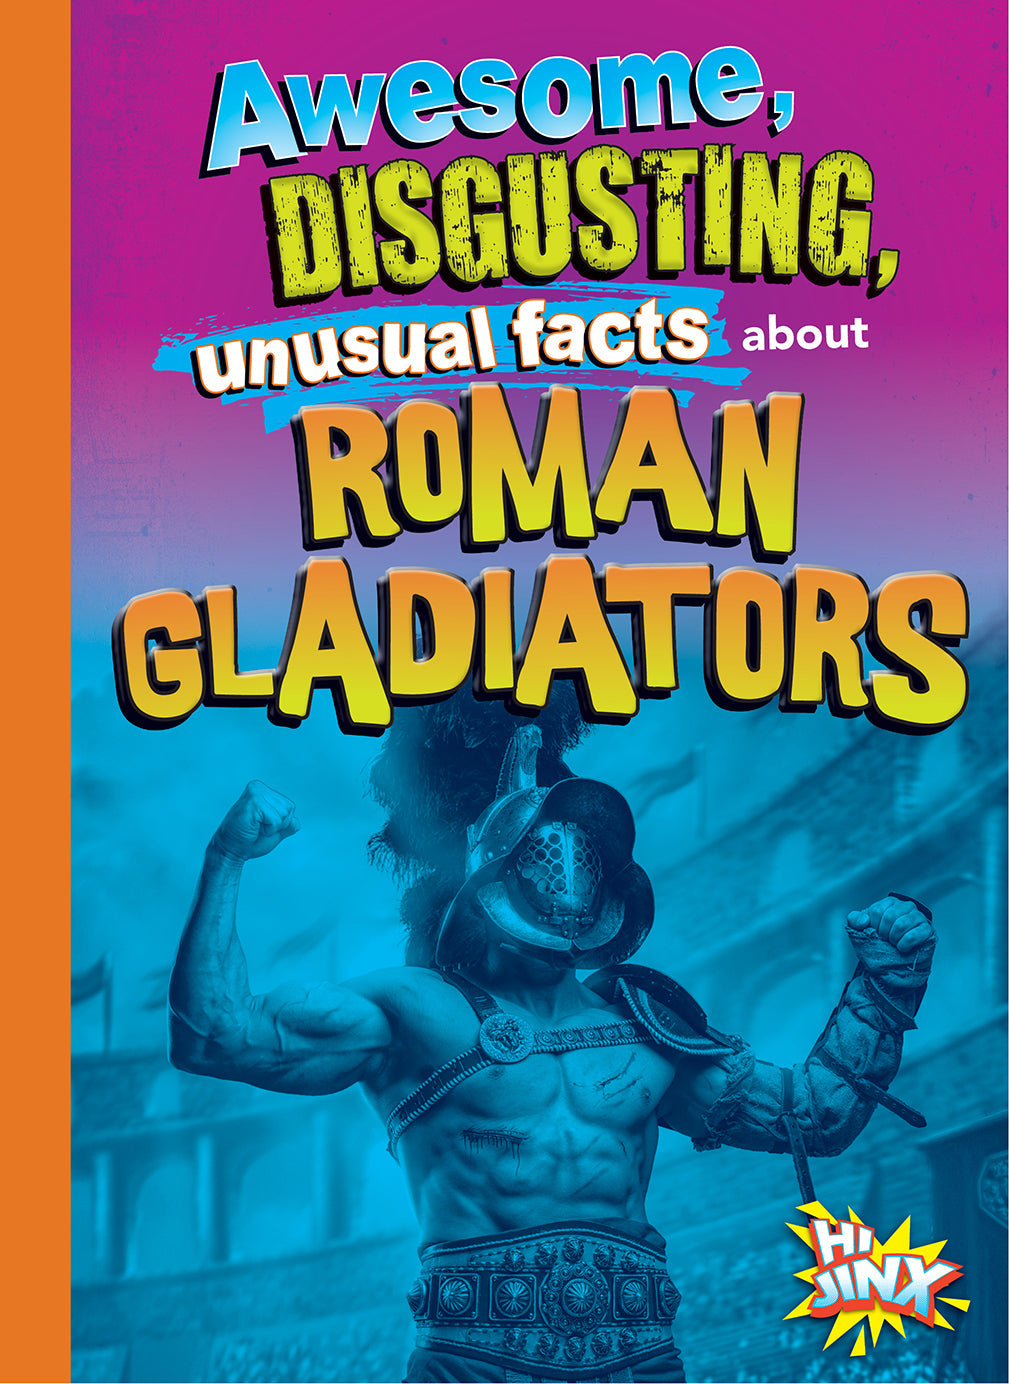 Gross, Awesome History: Awesome, Disgusting, Unusual Facts about Roman Gladiators